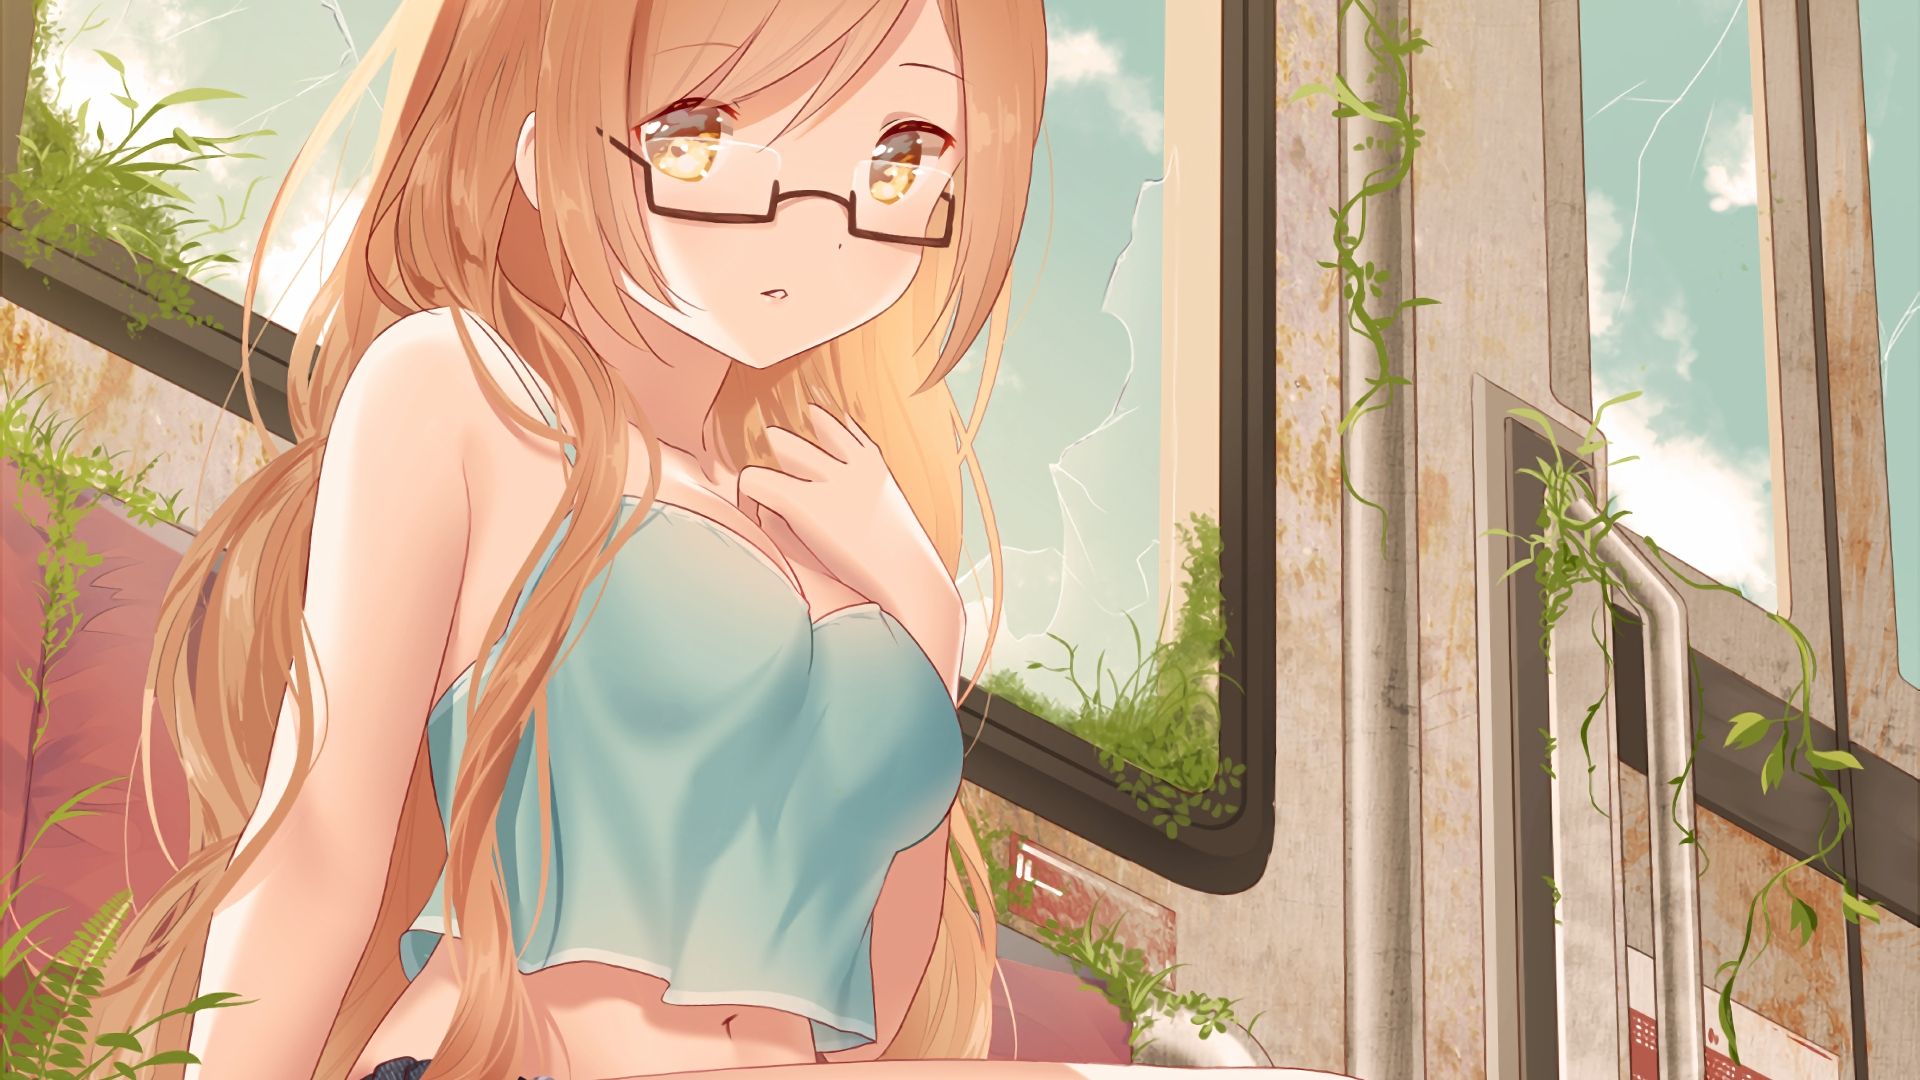 Desktop Wallpaper Hot Blonde Anime Girl In Short Jeans, Anime, Hd Image,  Picture, Background, Hov0w